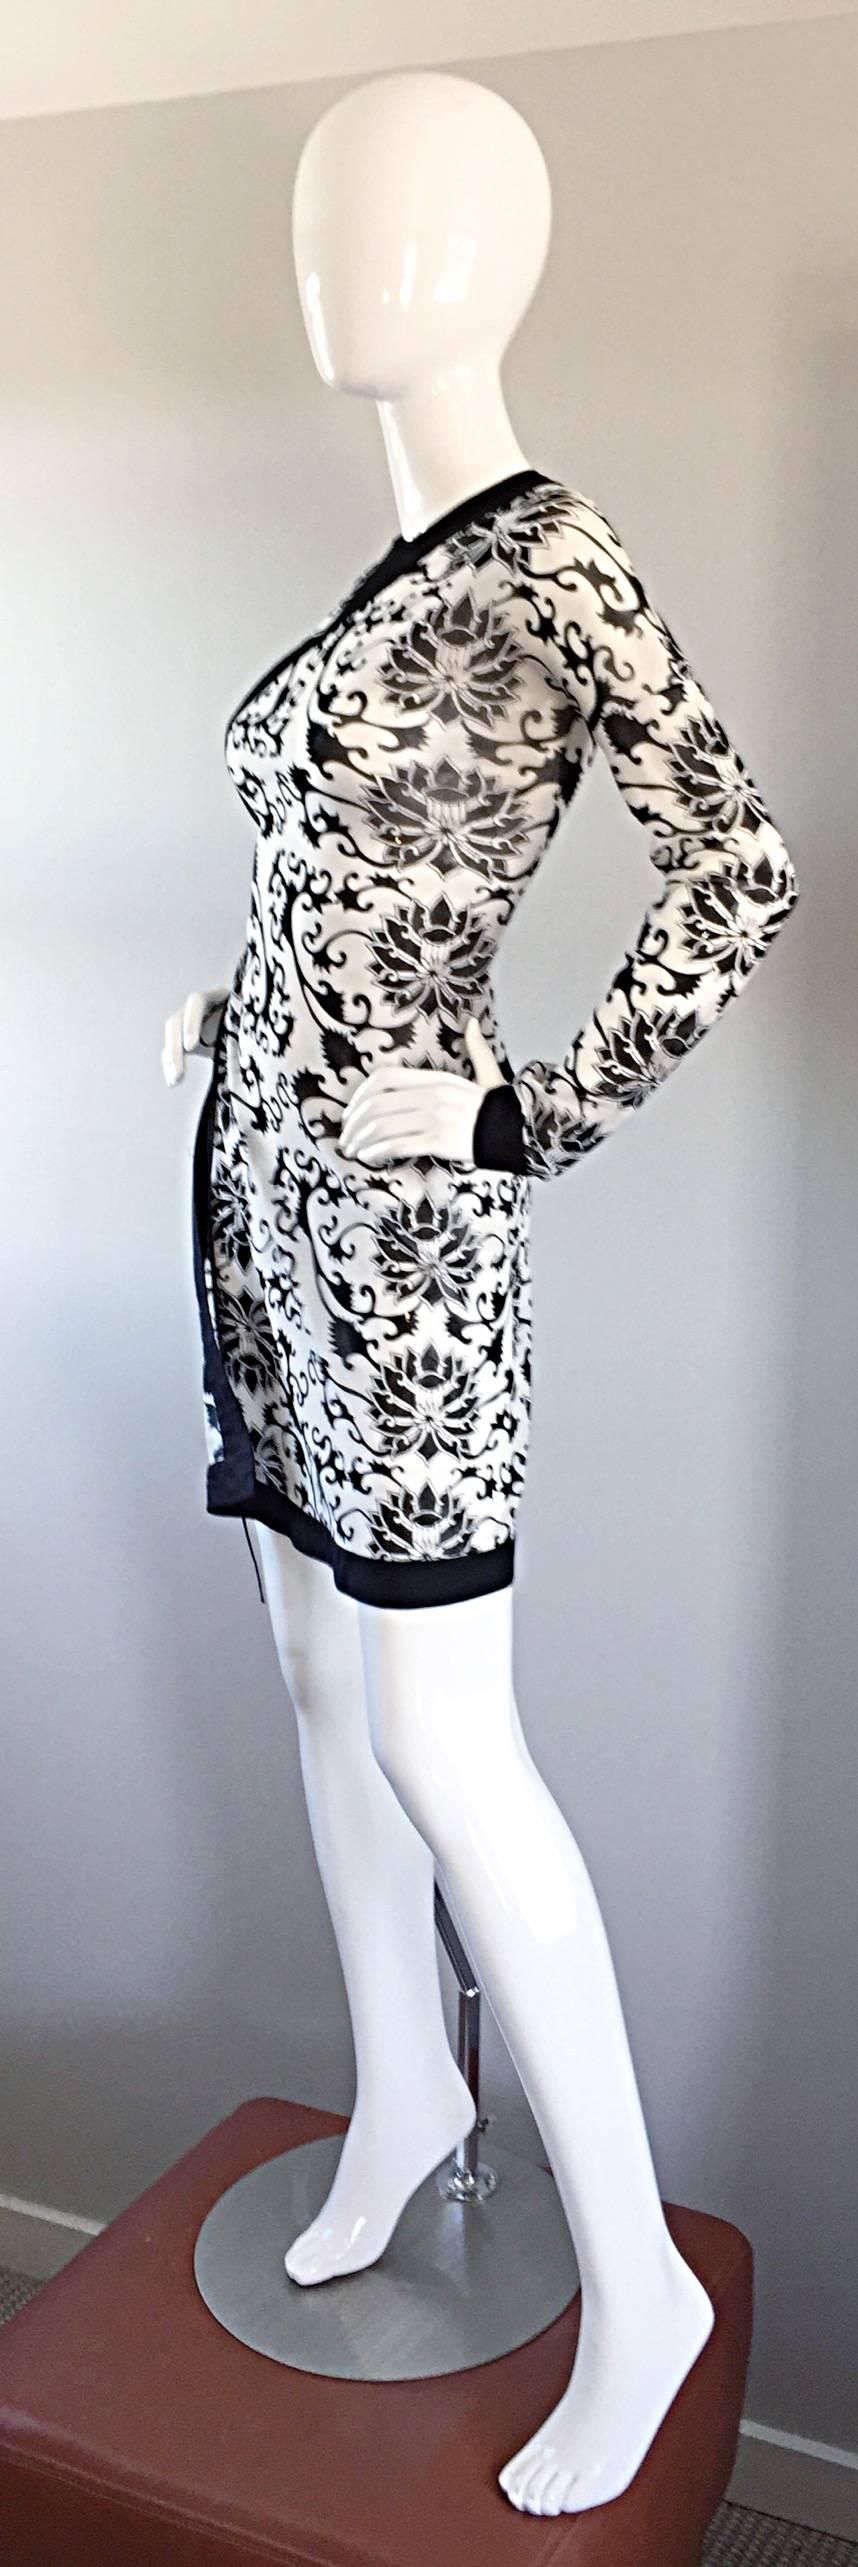 Women's Rare Vintage Vivienne Tam Black and White Tattoo Print Asian Inspired Wrap Dress For Sale